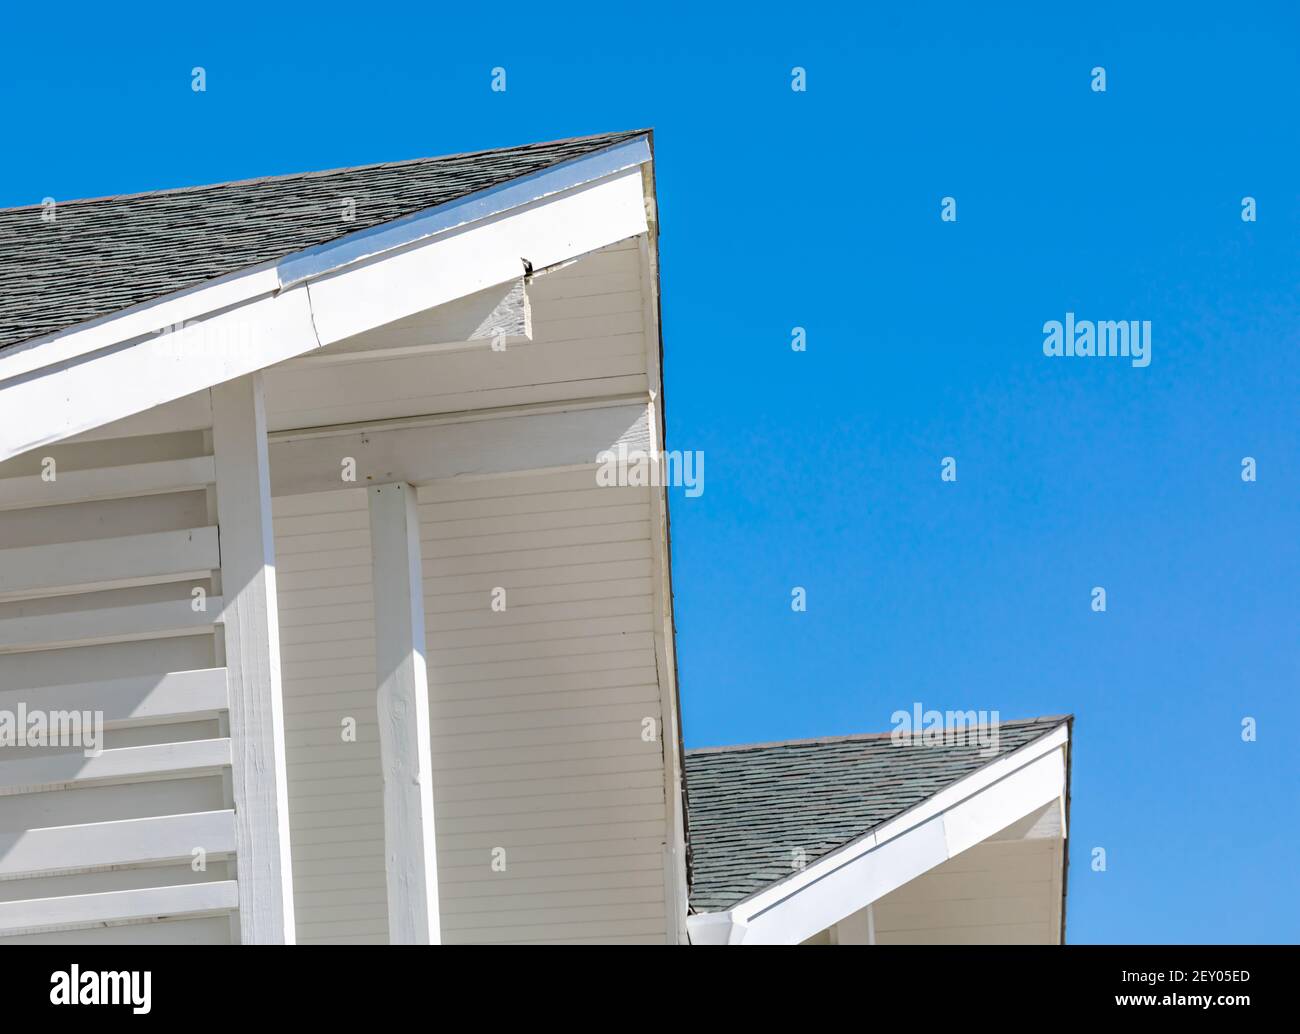 Architectural photograph of a roof against a brilliant blue sky Stock Photo